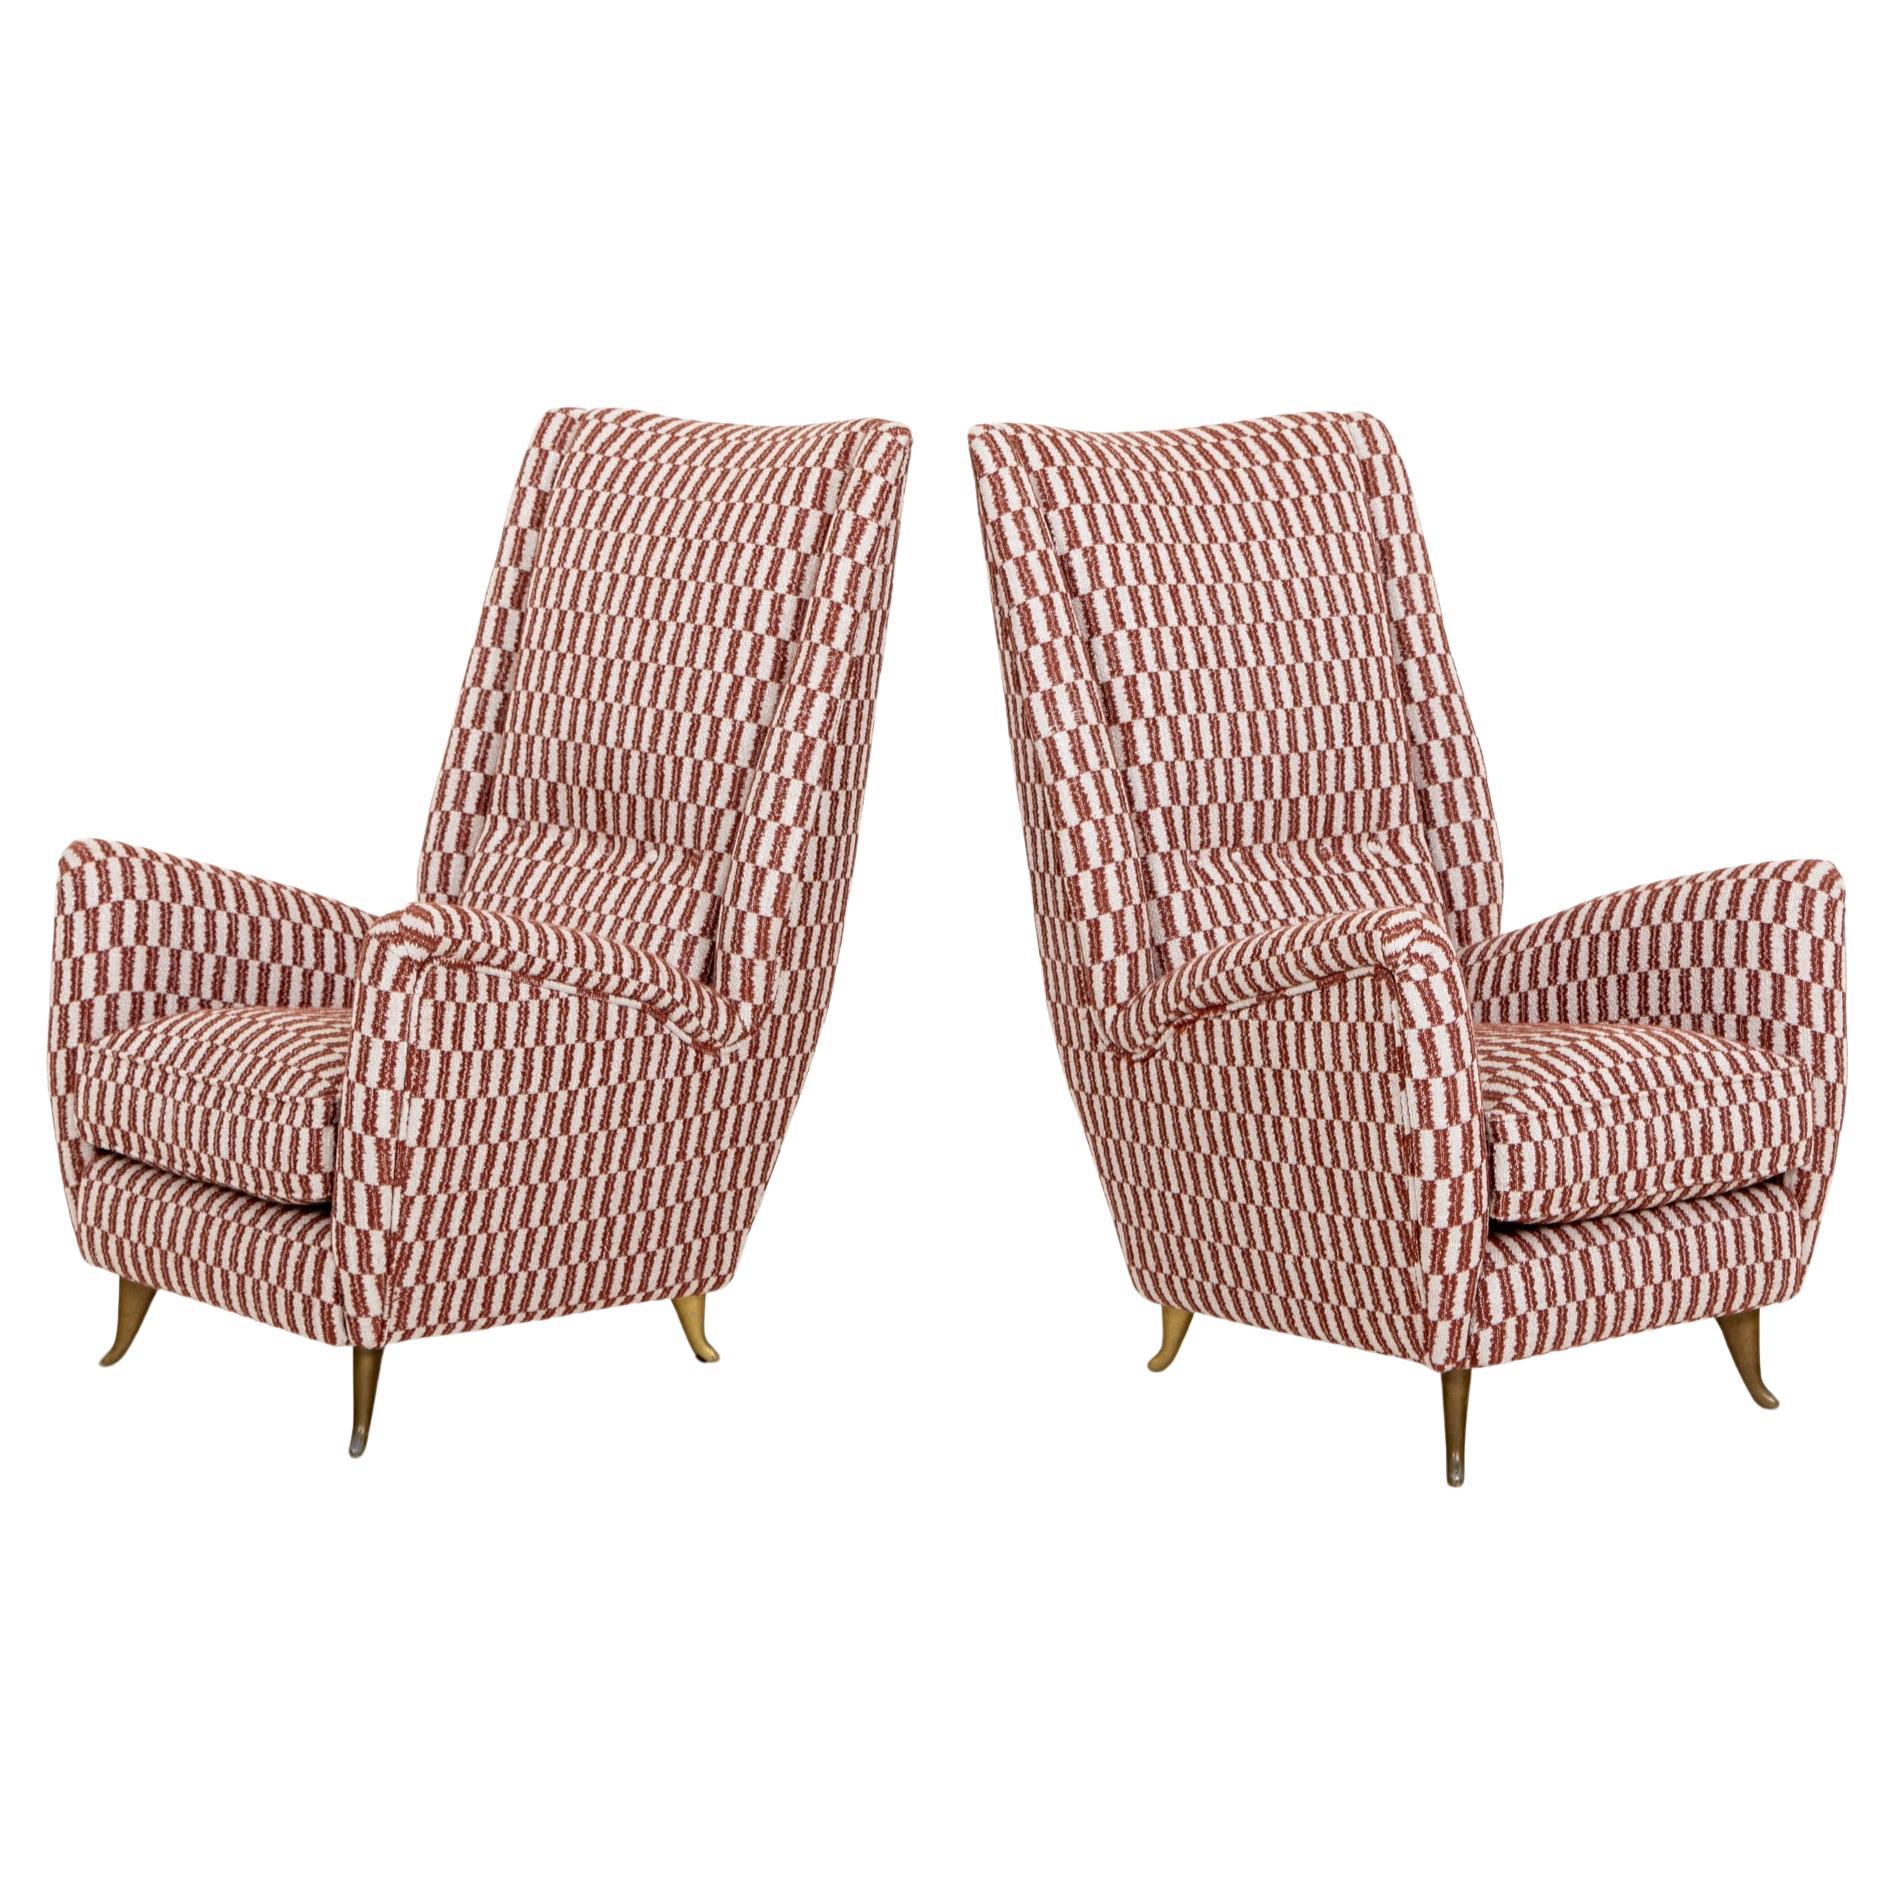 Pair Lounge Chairs by Gio Ponti for Isa Bergamo, Italy 1950s For Sale